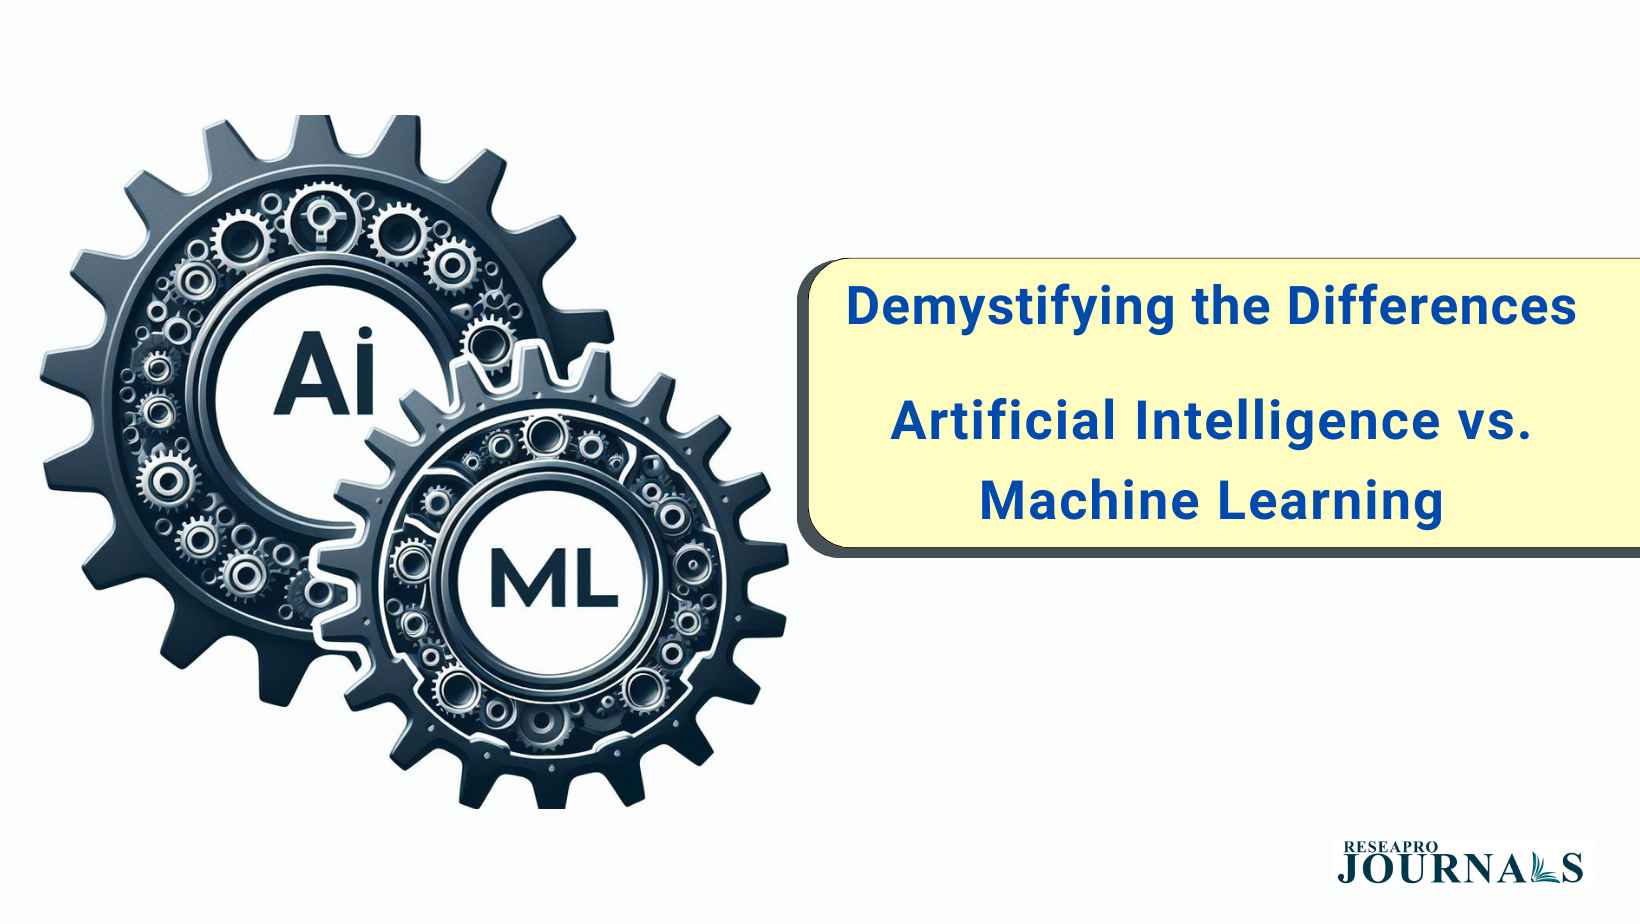 Demystifying the Differences: Artificial Intelligence vs. Machine Learning